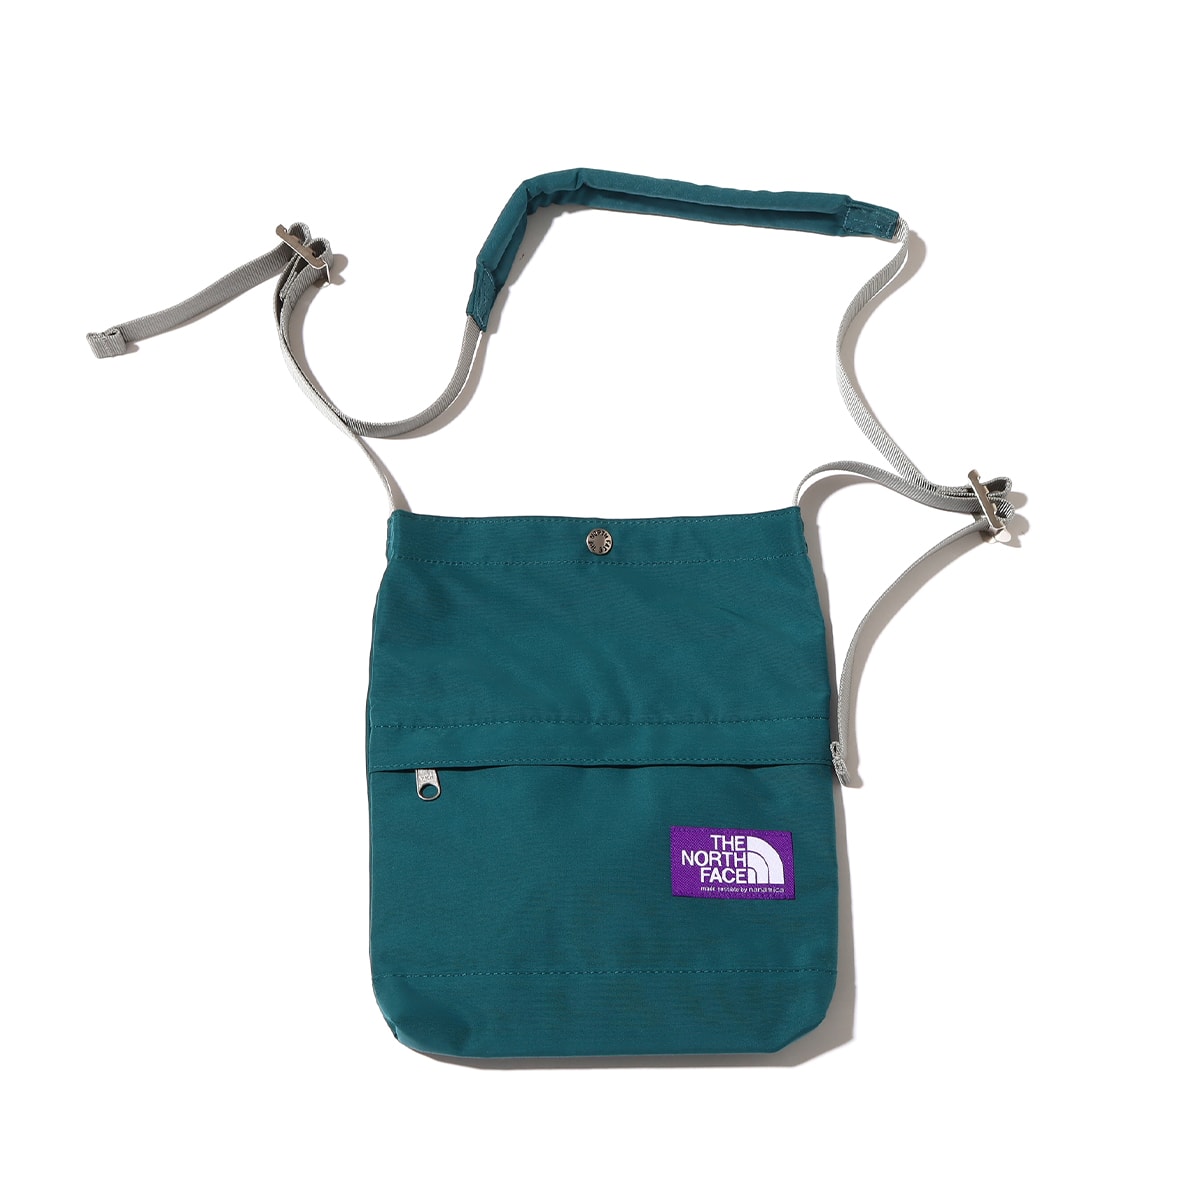 THE NORTH FACE PURPLE LABEL Field Small Shoulder Bag Teal Green 22FW-I